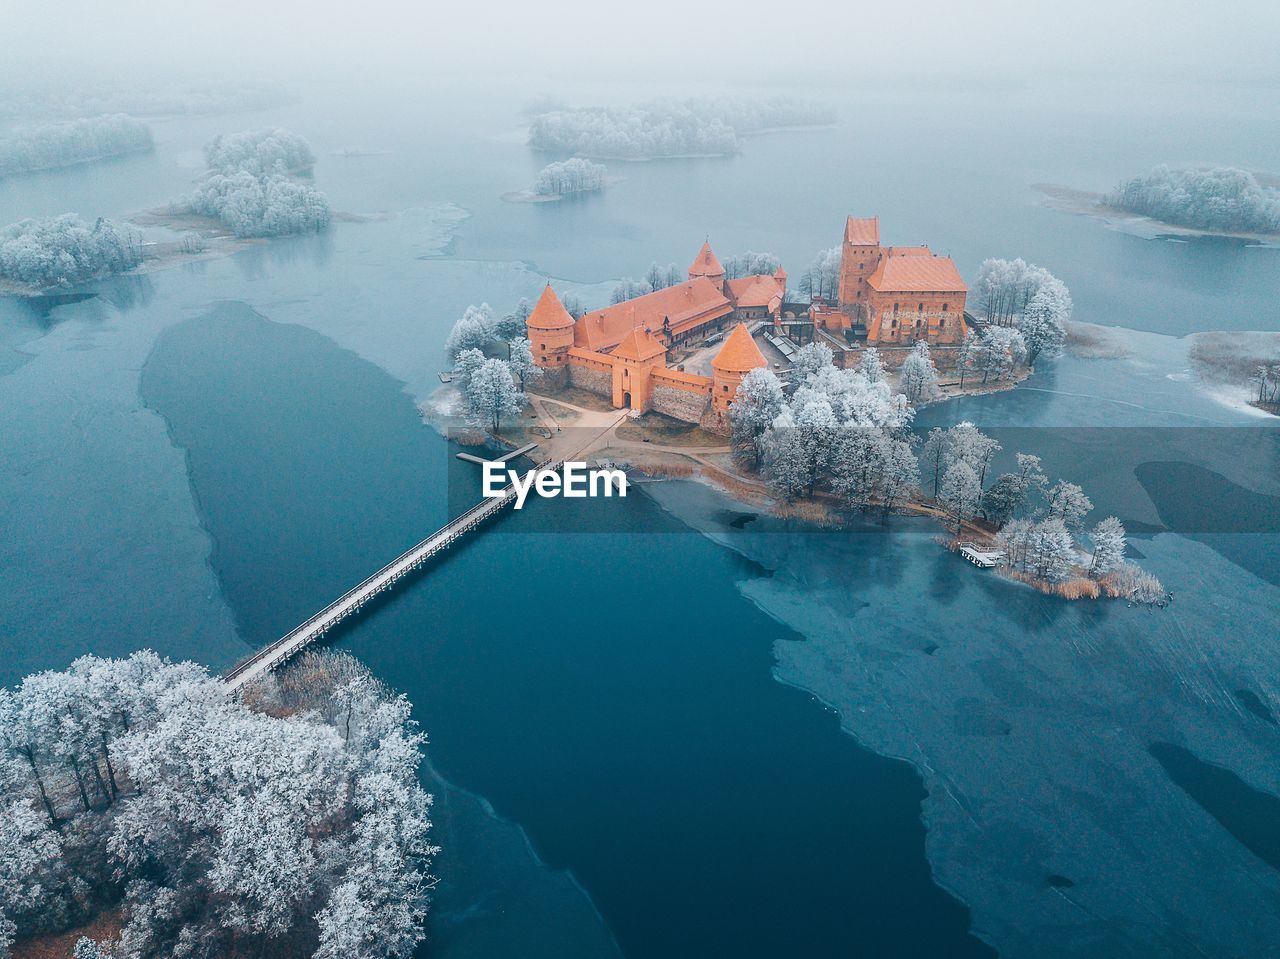 Aerial view of buildings amidst frozen lake